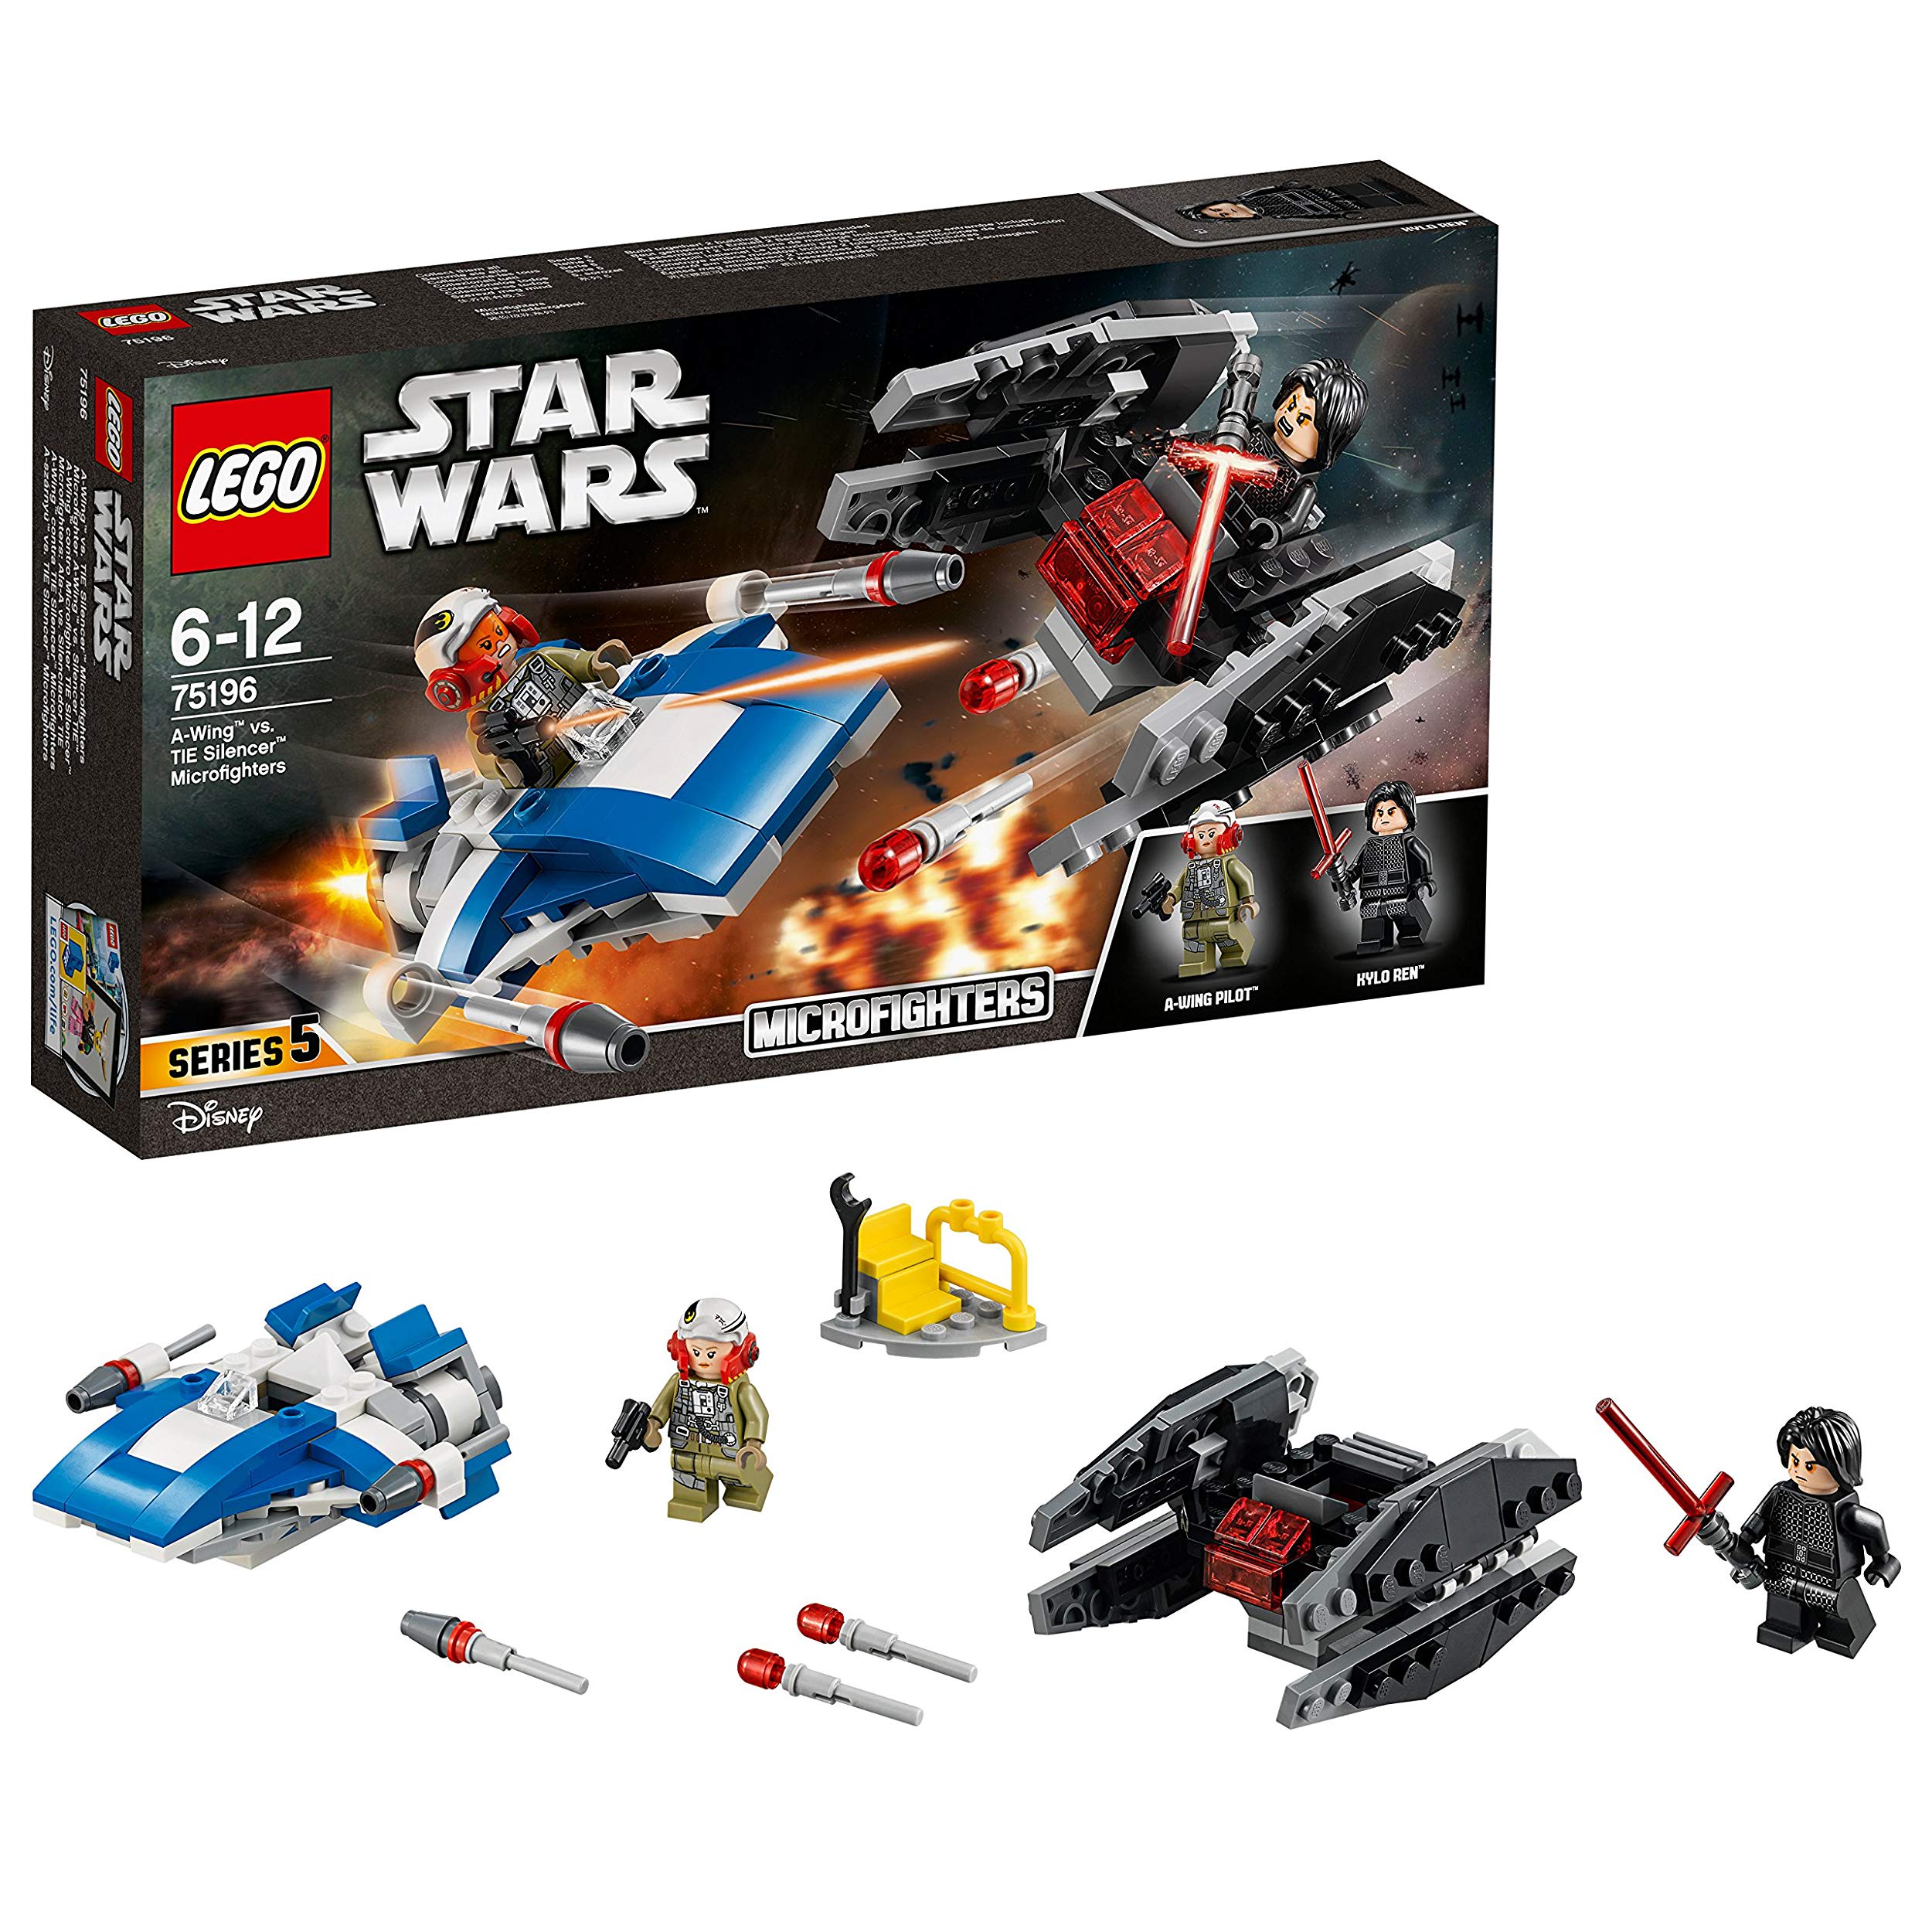 Lego Star Wars A Wing Vs Tie Silencer Micro Fighters Toy